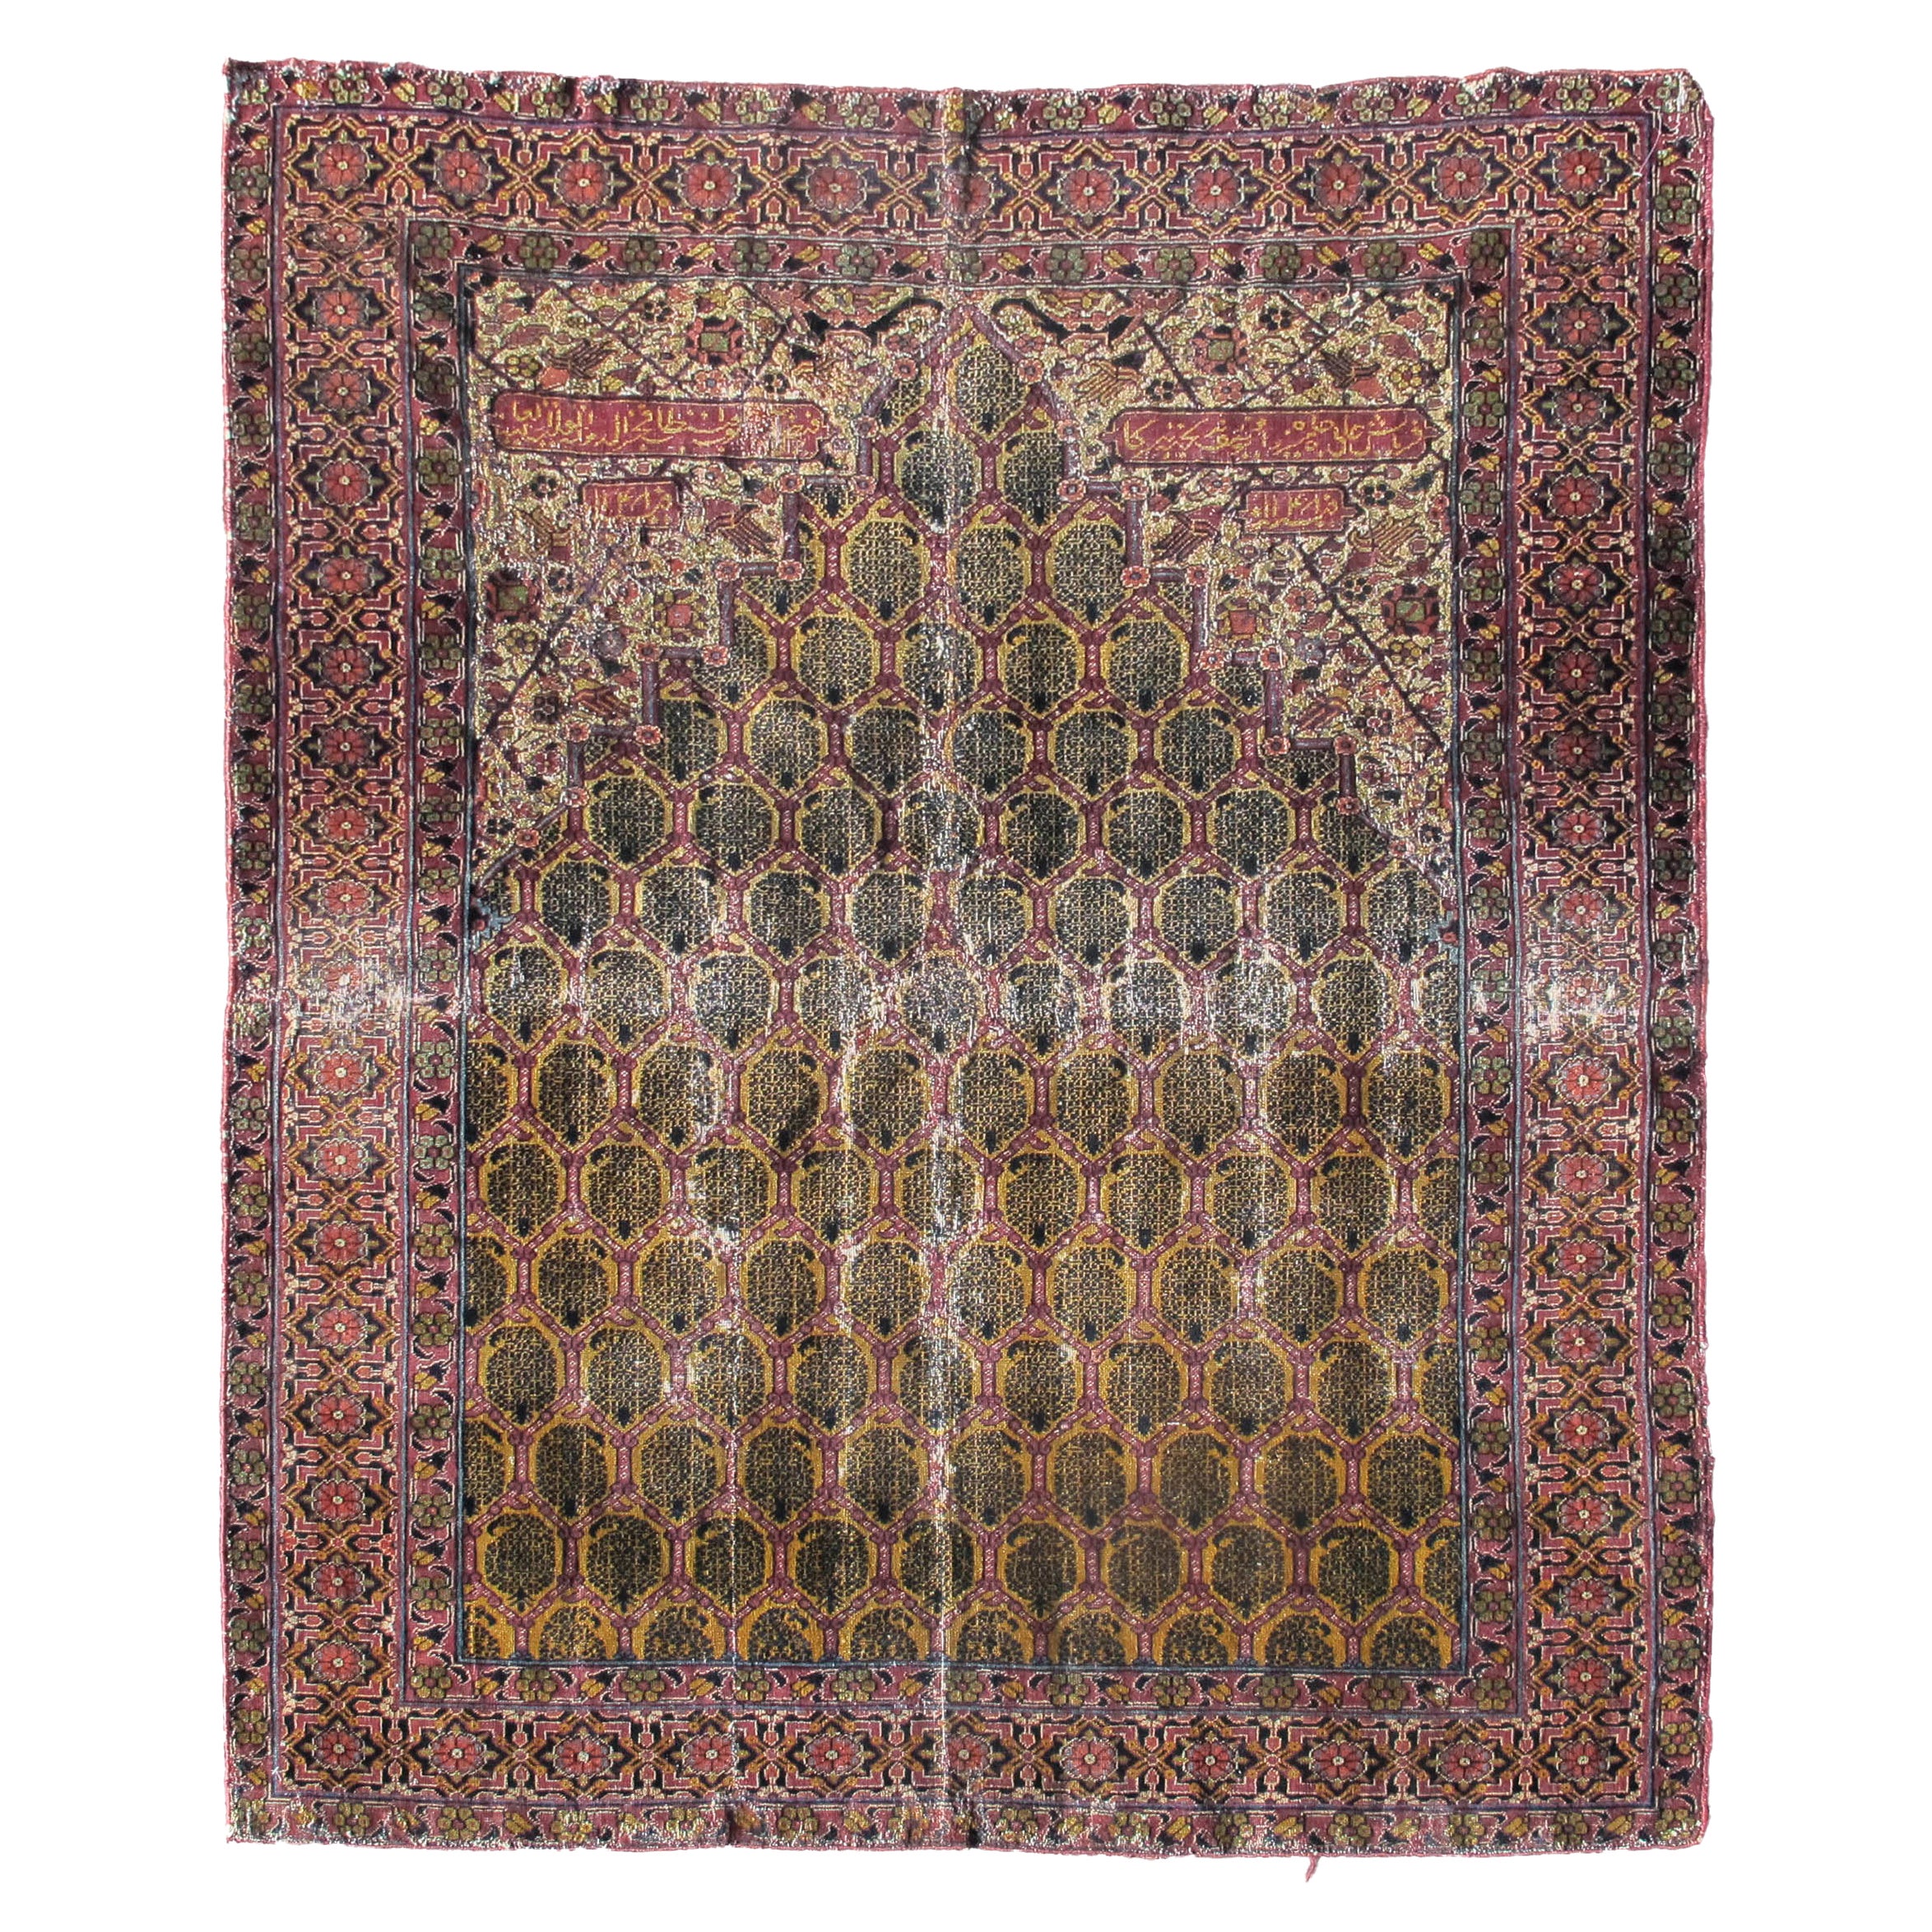 Antique Indo-Persian Prayer Rug, Early 19th Century For Sale